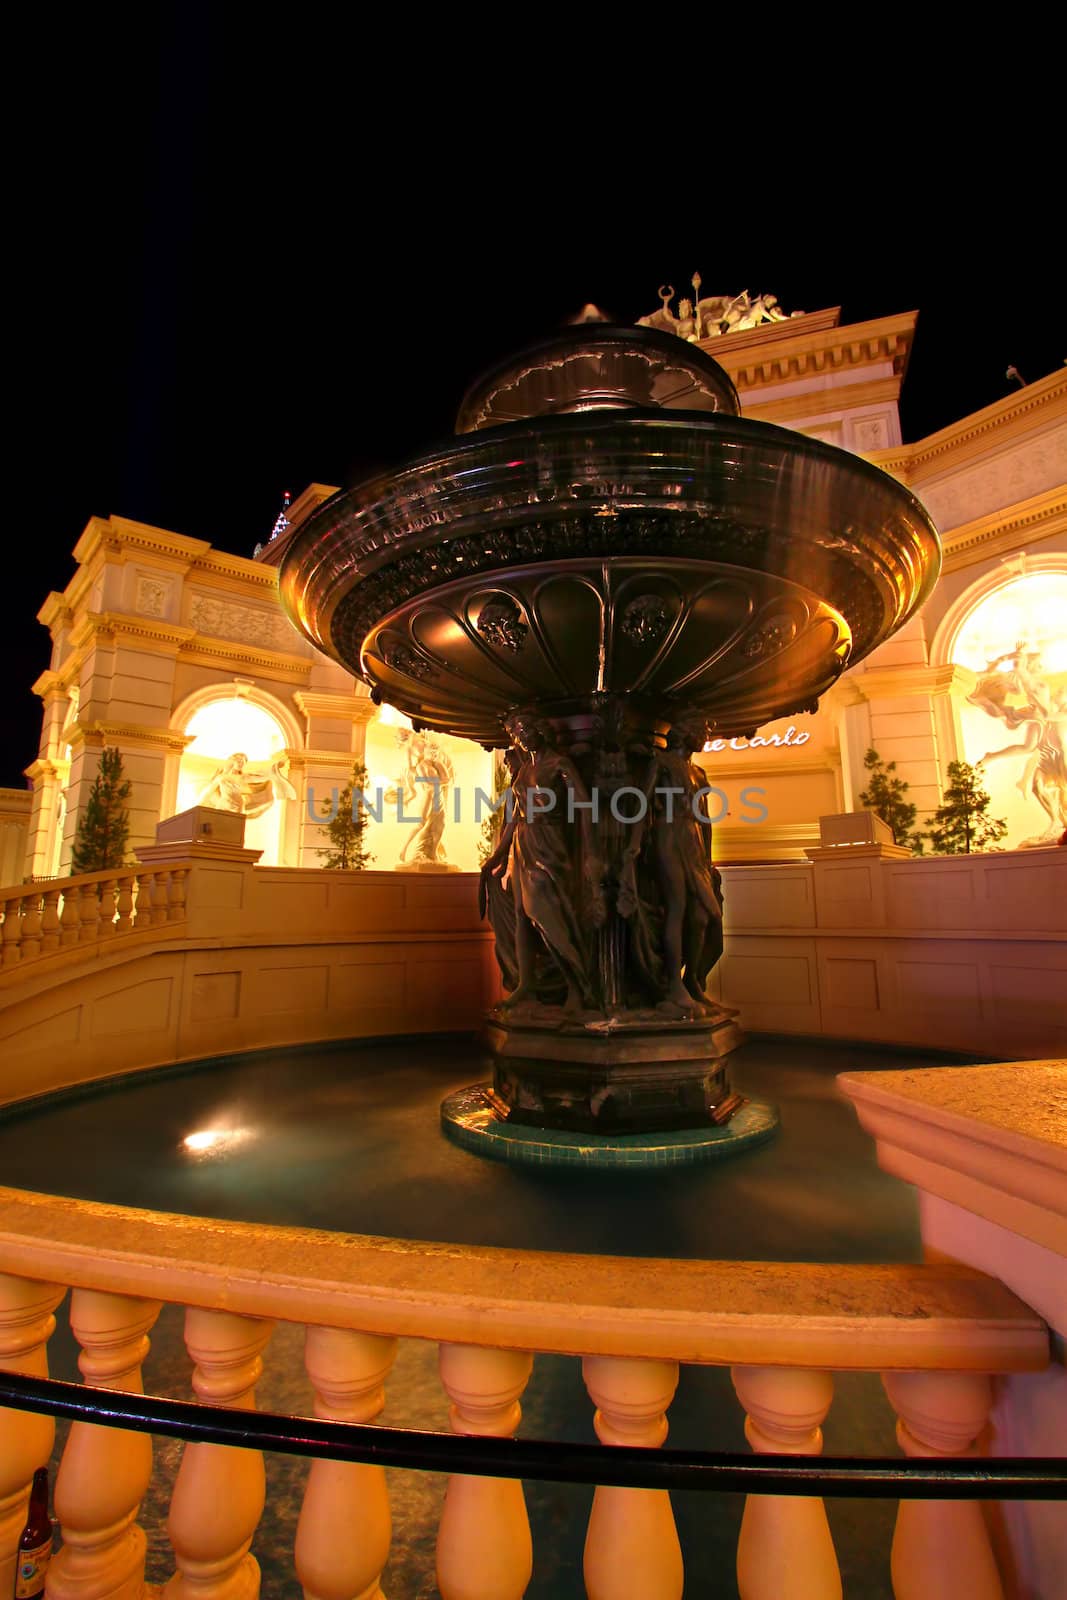 Las Vegas, USA - April 22, 2012: The entrance to the Monte Carlo Resort and Casino in Las Vegas.  The Monte Carlo opened in 1996 and has over 2,900 rooms available for visitors.